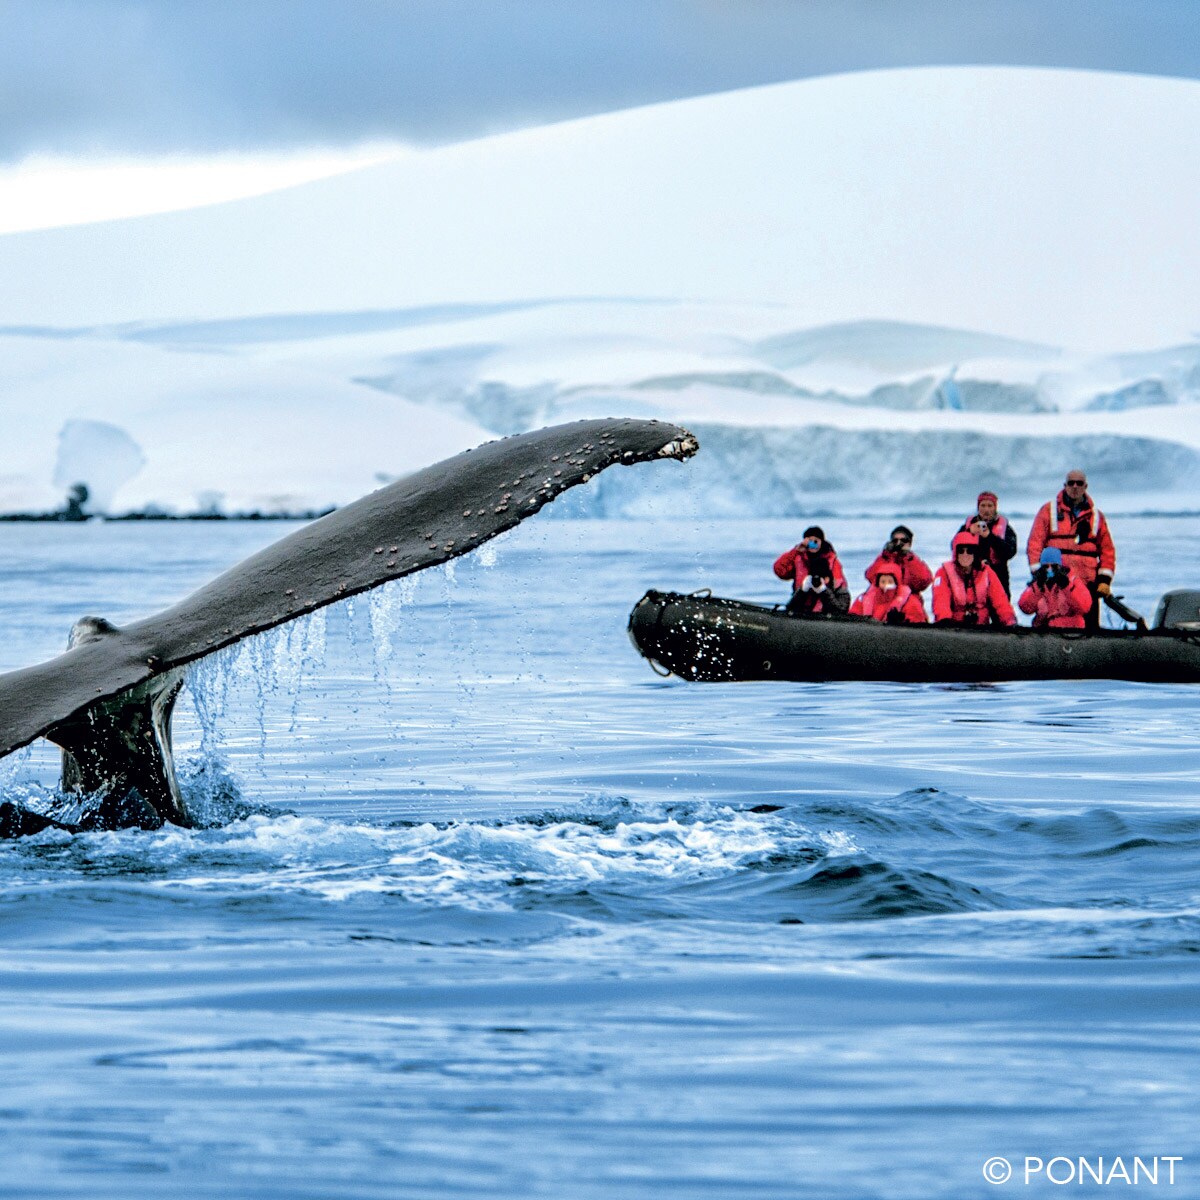 A whale’s tail breaches the surface of the water as a group of people wearing safety vests watch from a raft cruising near a large glacier